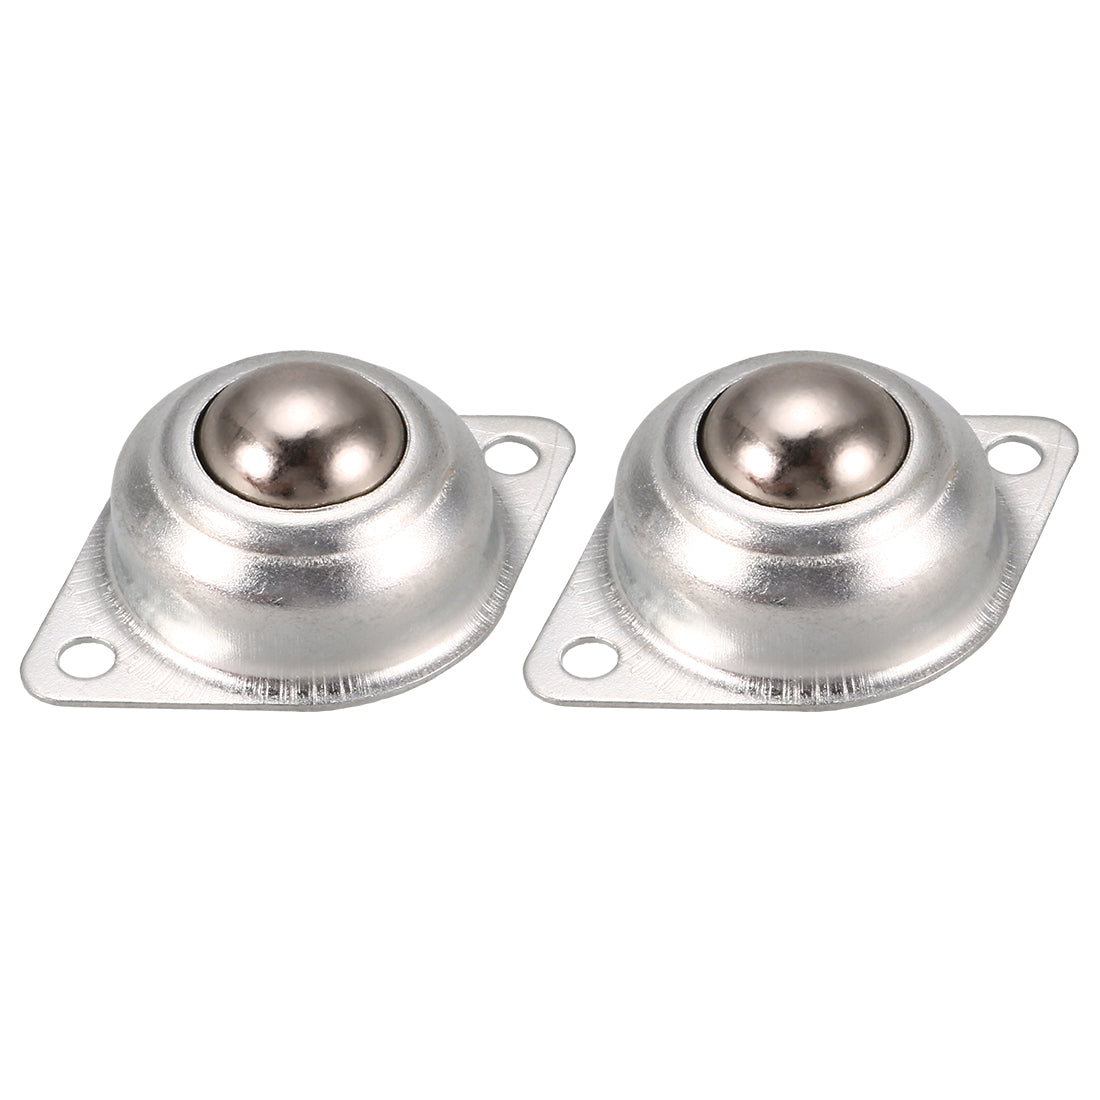 uxcell Uxcell 14mm Dia Ball Transfer Bearing Unit Casters Universal Wheel Silver Tone 2pcs